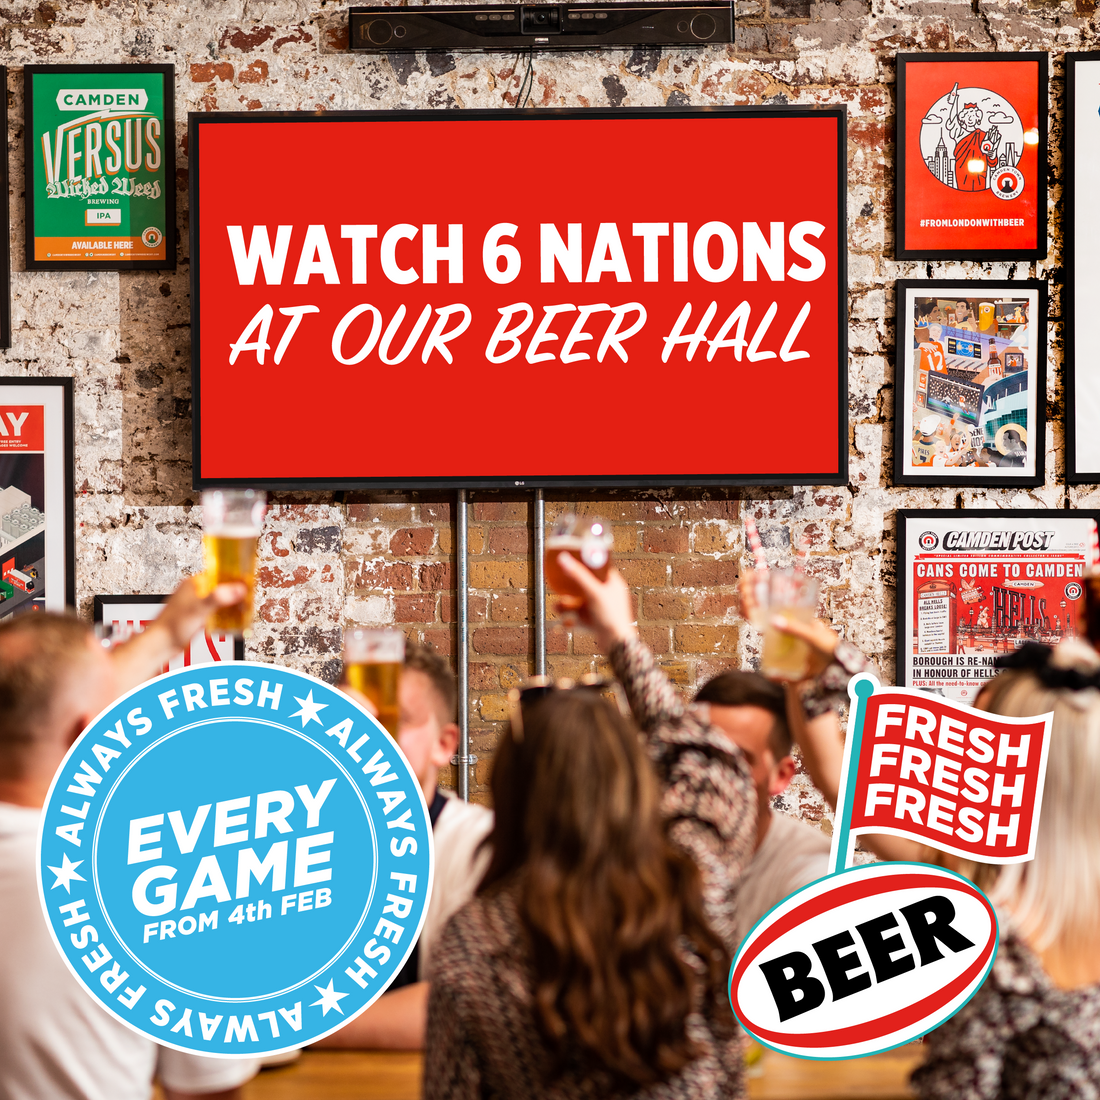 WATCH THE 6 NATIONS AT OUR BEER HALL!